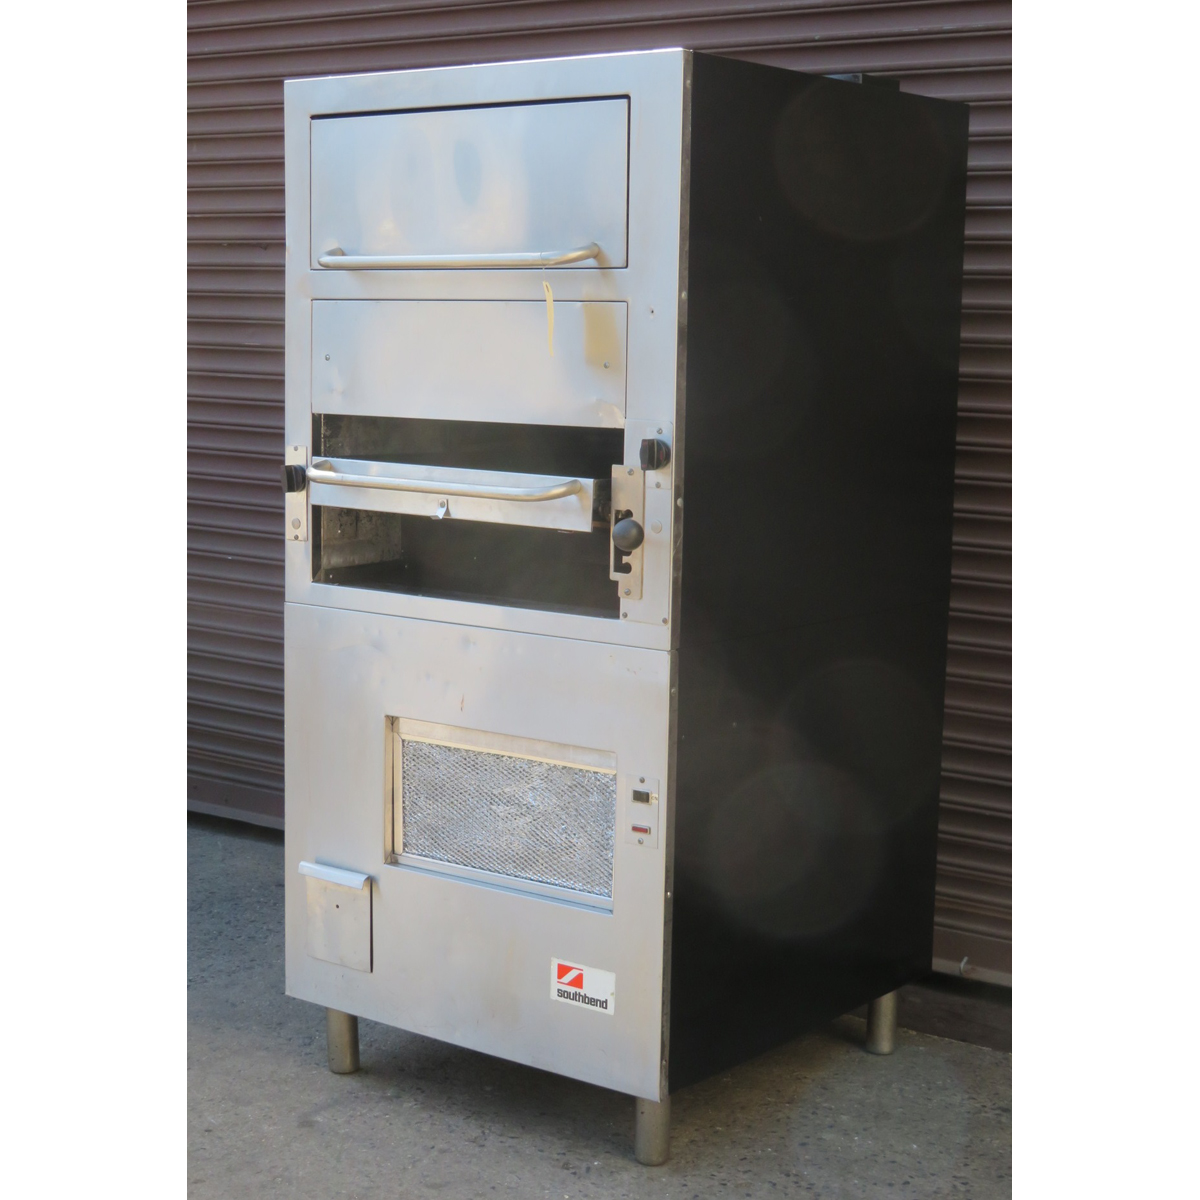 Southbend 171D Upright Infrared Broiler, Used Very Good Condition image 1